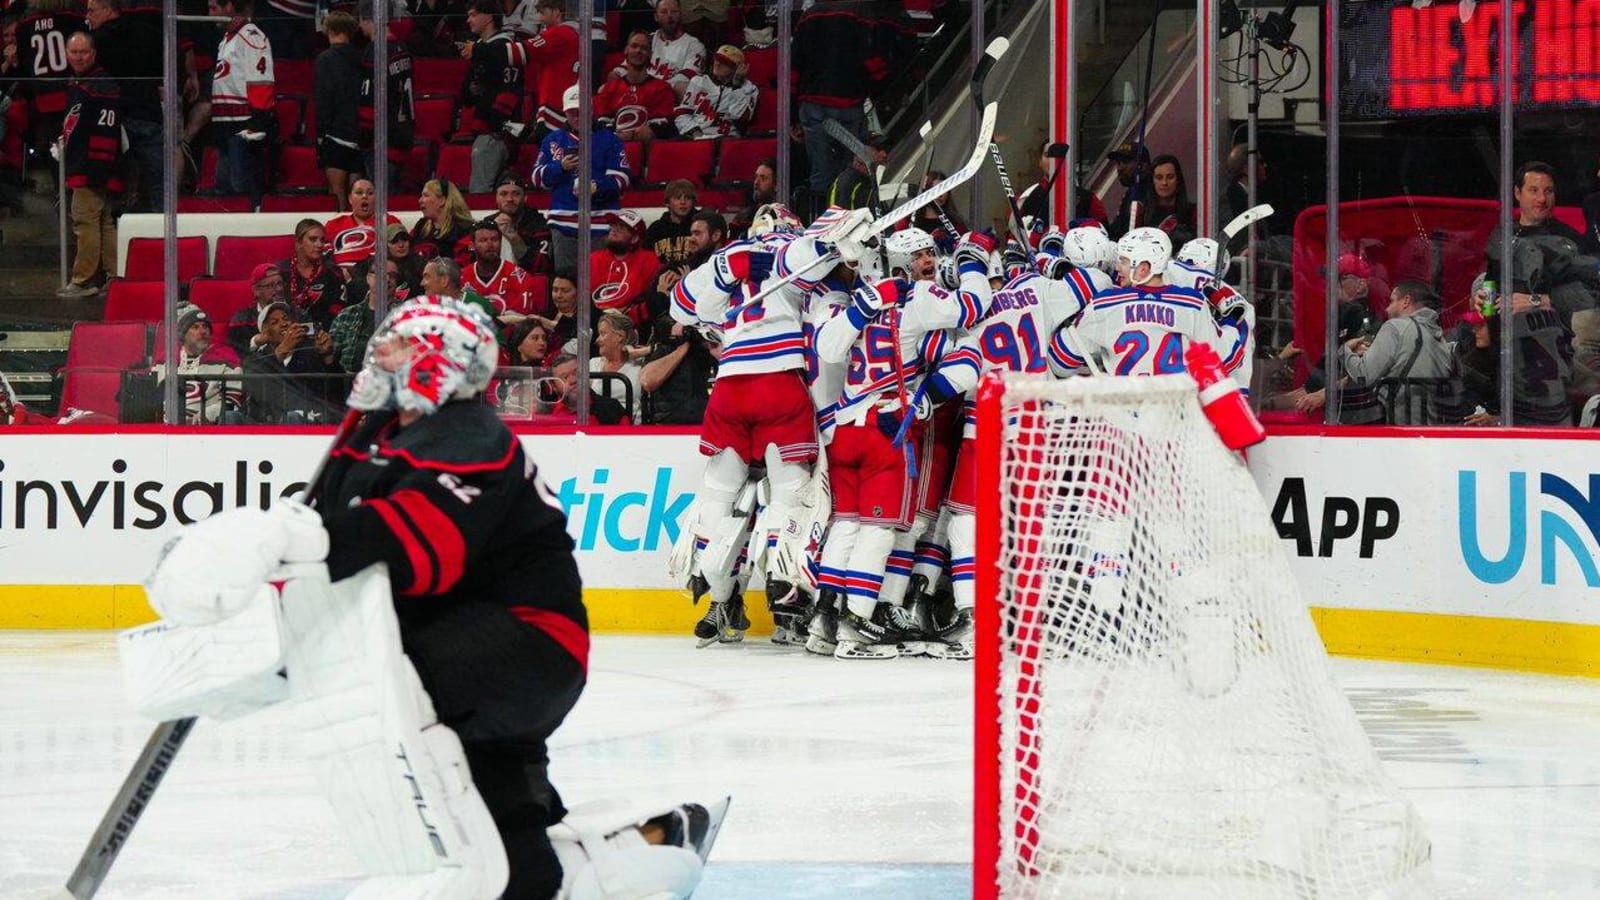 Stanley Cup Playoffs Day 20: Rangers take 3-0 series lead with Panarin OT winner